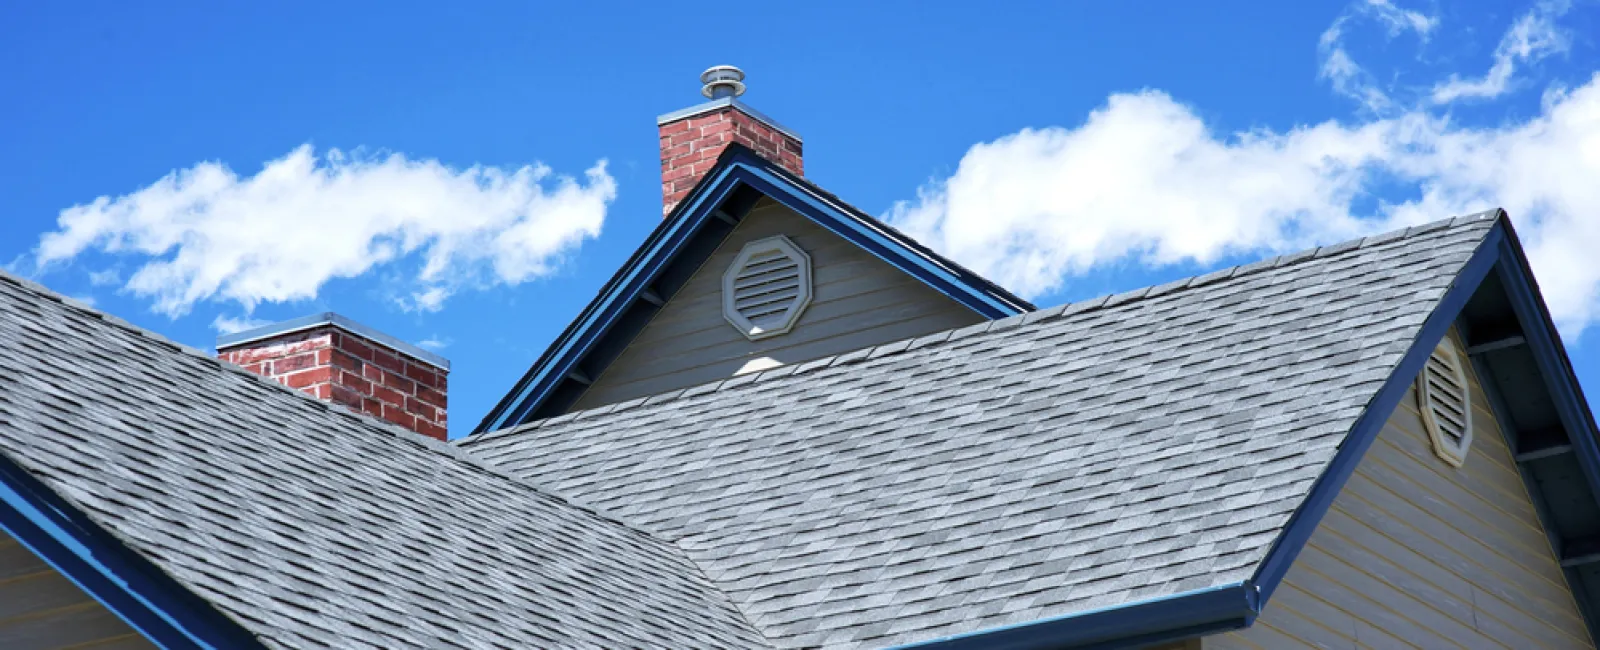 How to Choose a Quality Roofing Contractor (with Ralph Finizio of GAF)